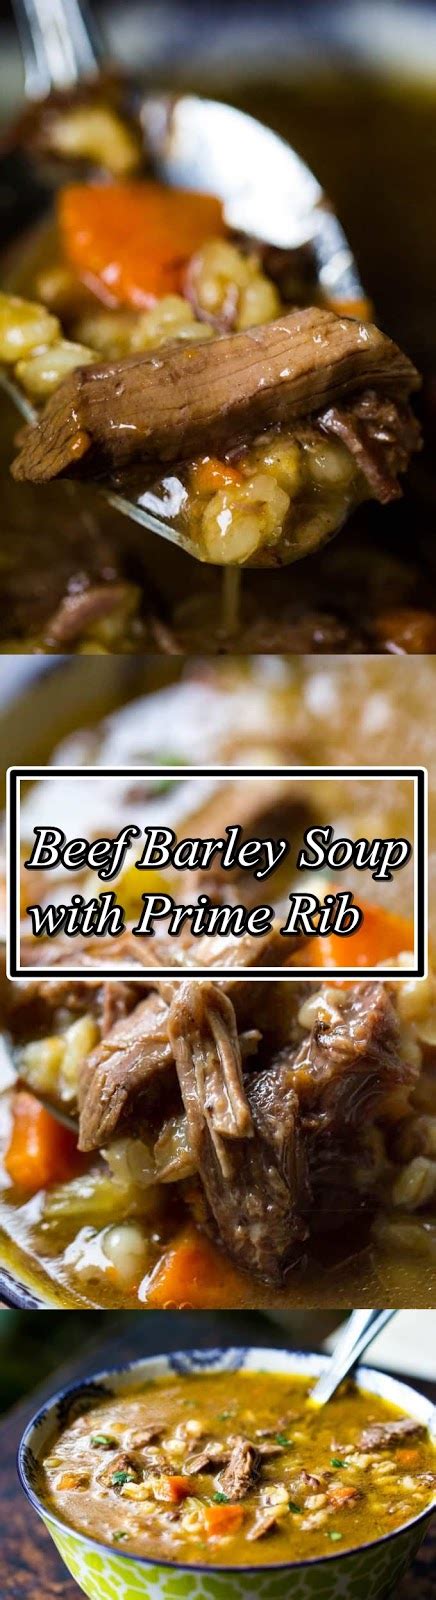 You'll want to remove the roast from the oven when its internal temperature reaches 110º, which for a 5lb roast should take about 1 hour. Beef Barley Soup with Prime Rib - Recipe Kuenak